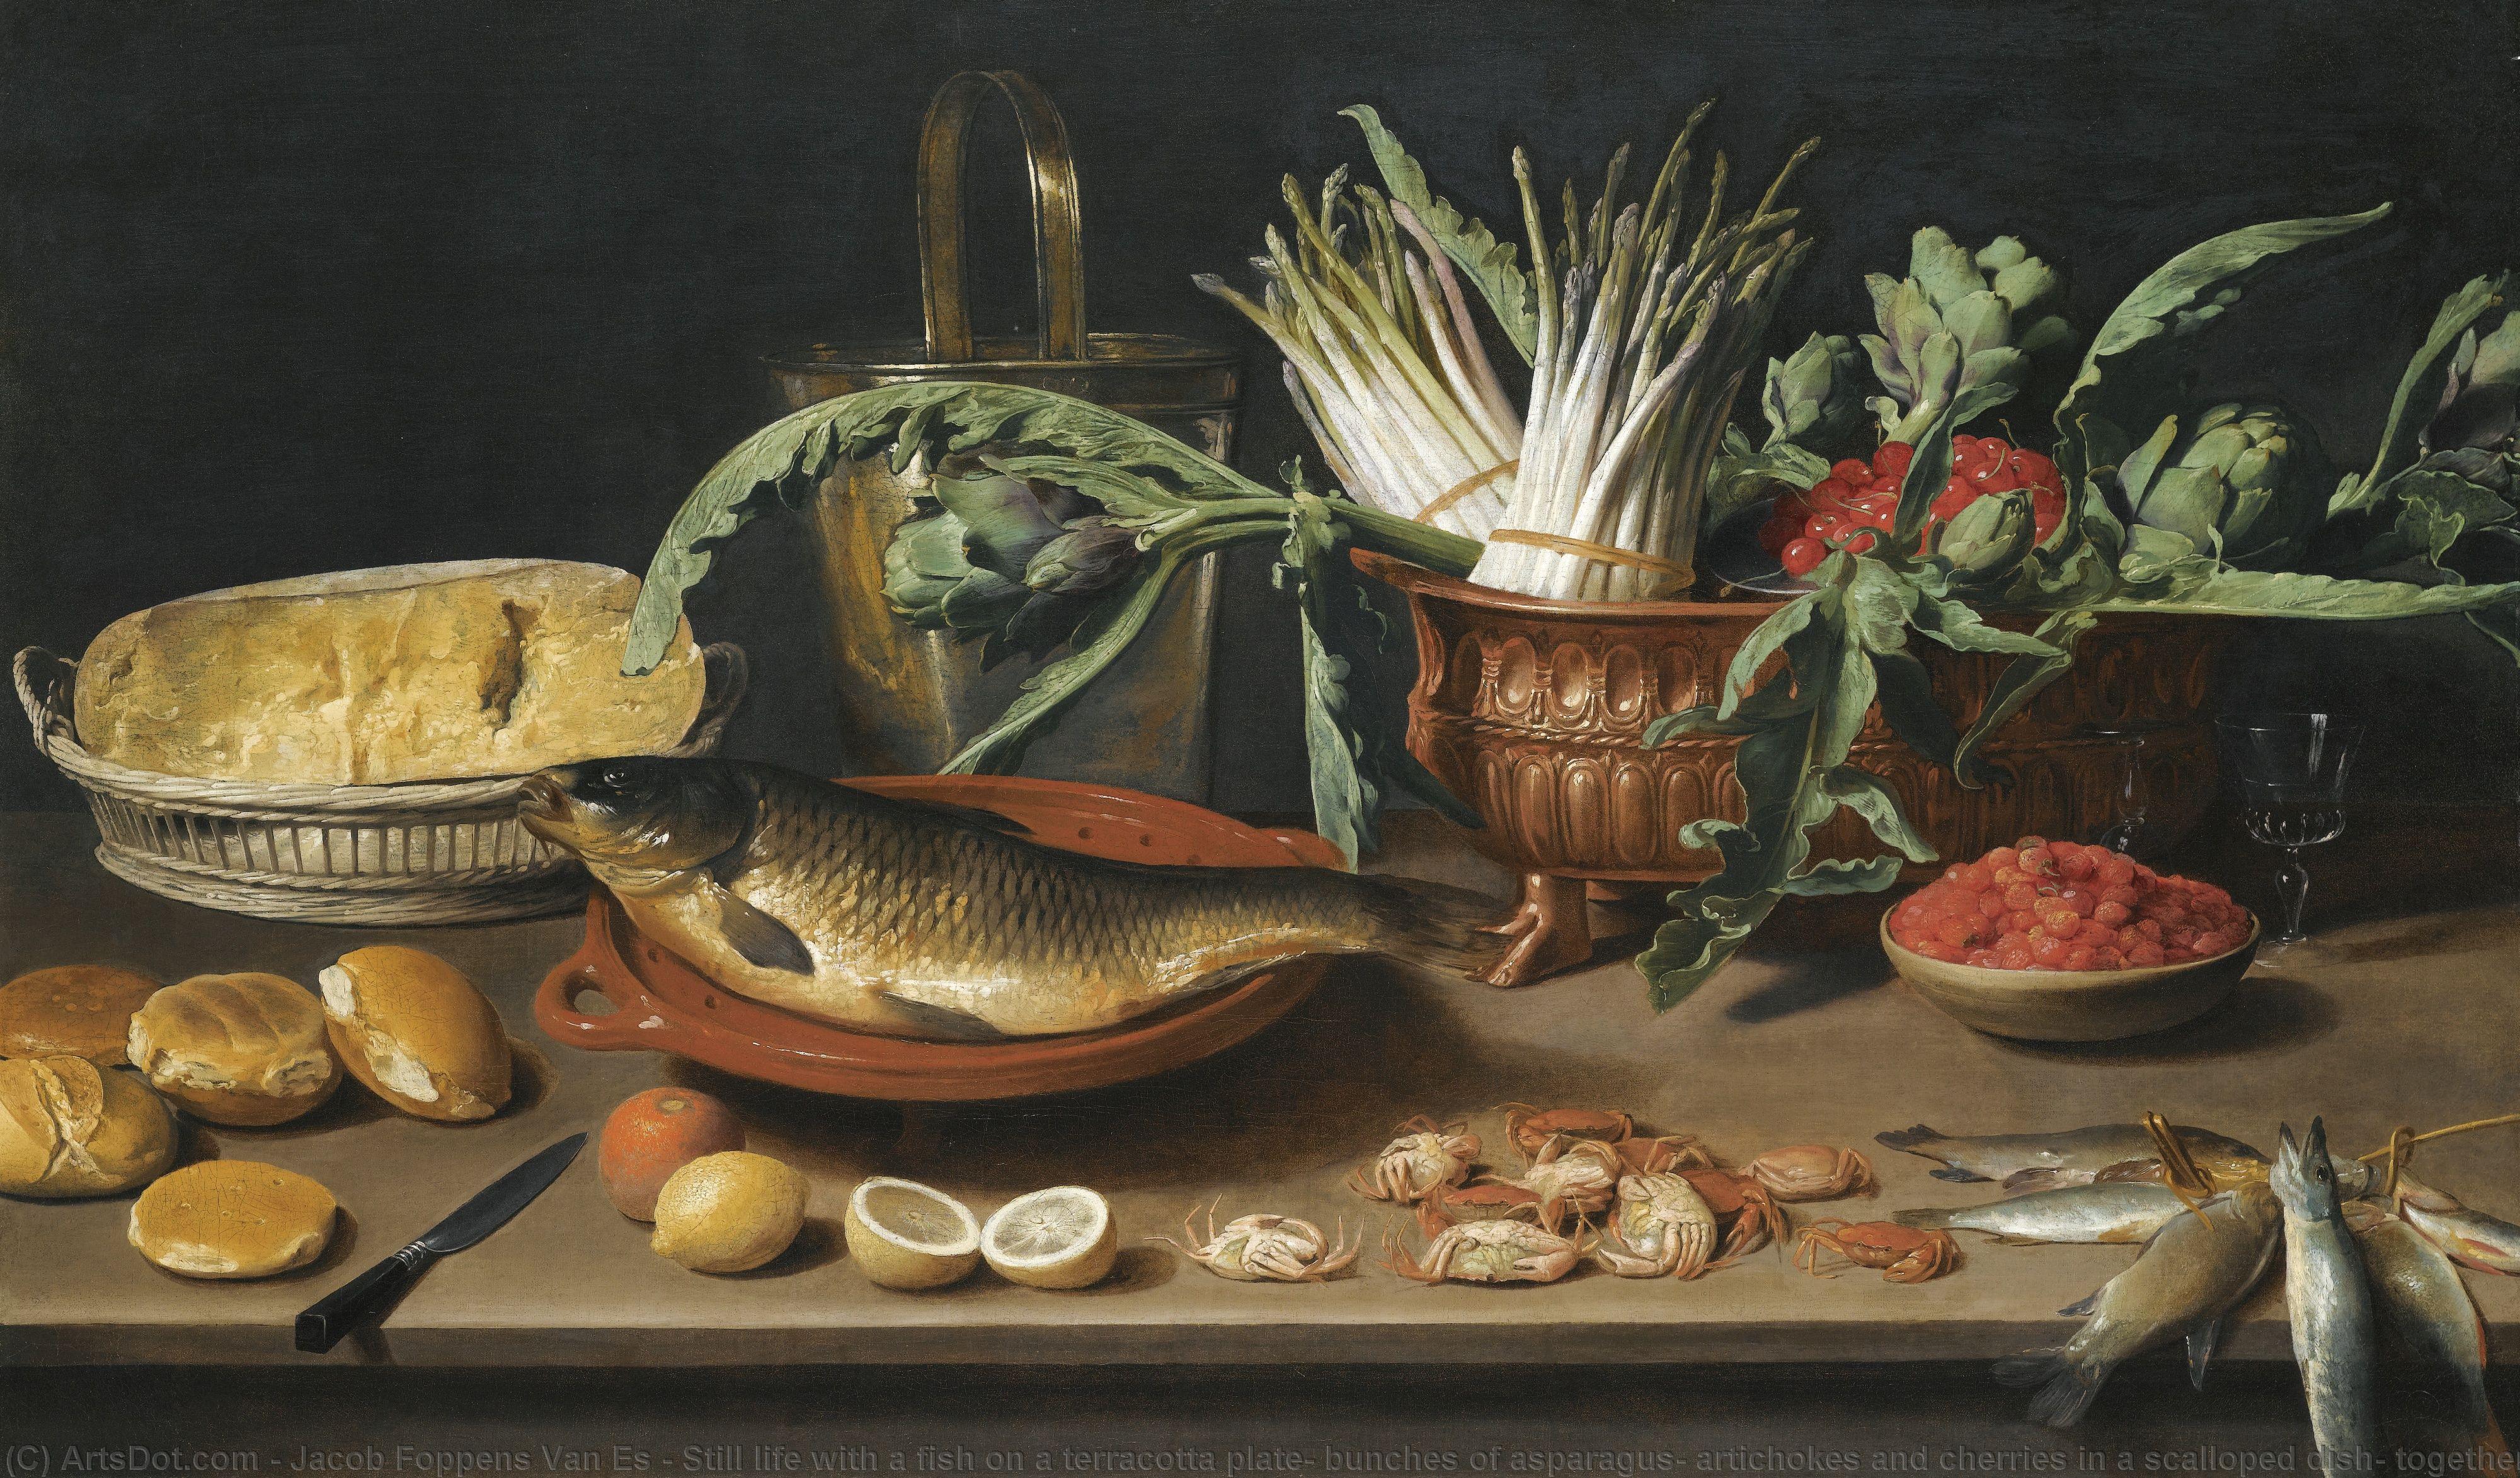 Wikioo.org - Bách khoa toàn thư về mỹ thuật - Vẽ tranh, Tác phẩm nghệ thuật Jacob Foppens Van Es - Still life with a fish on a terracotta plate, bunches of asparagus, artichokes and cherries in a scalloped dish, together with half a cheese in a basket, bread rolls, fraises de bois, lemons, oranges and crabs all arranged on a table top